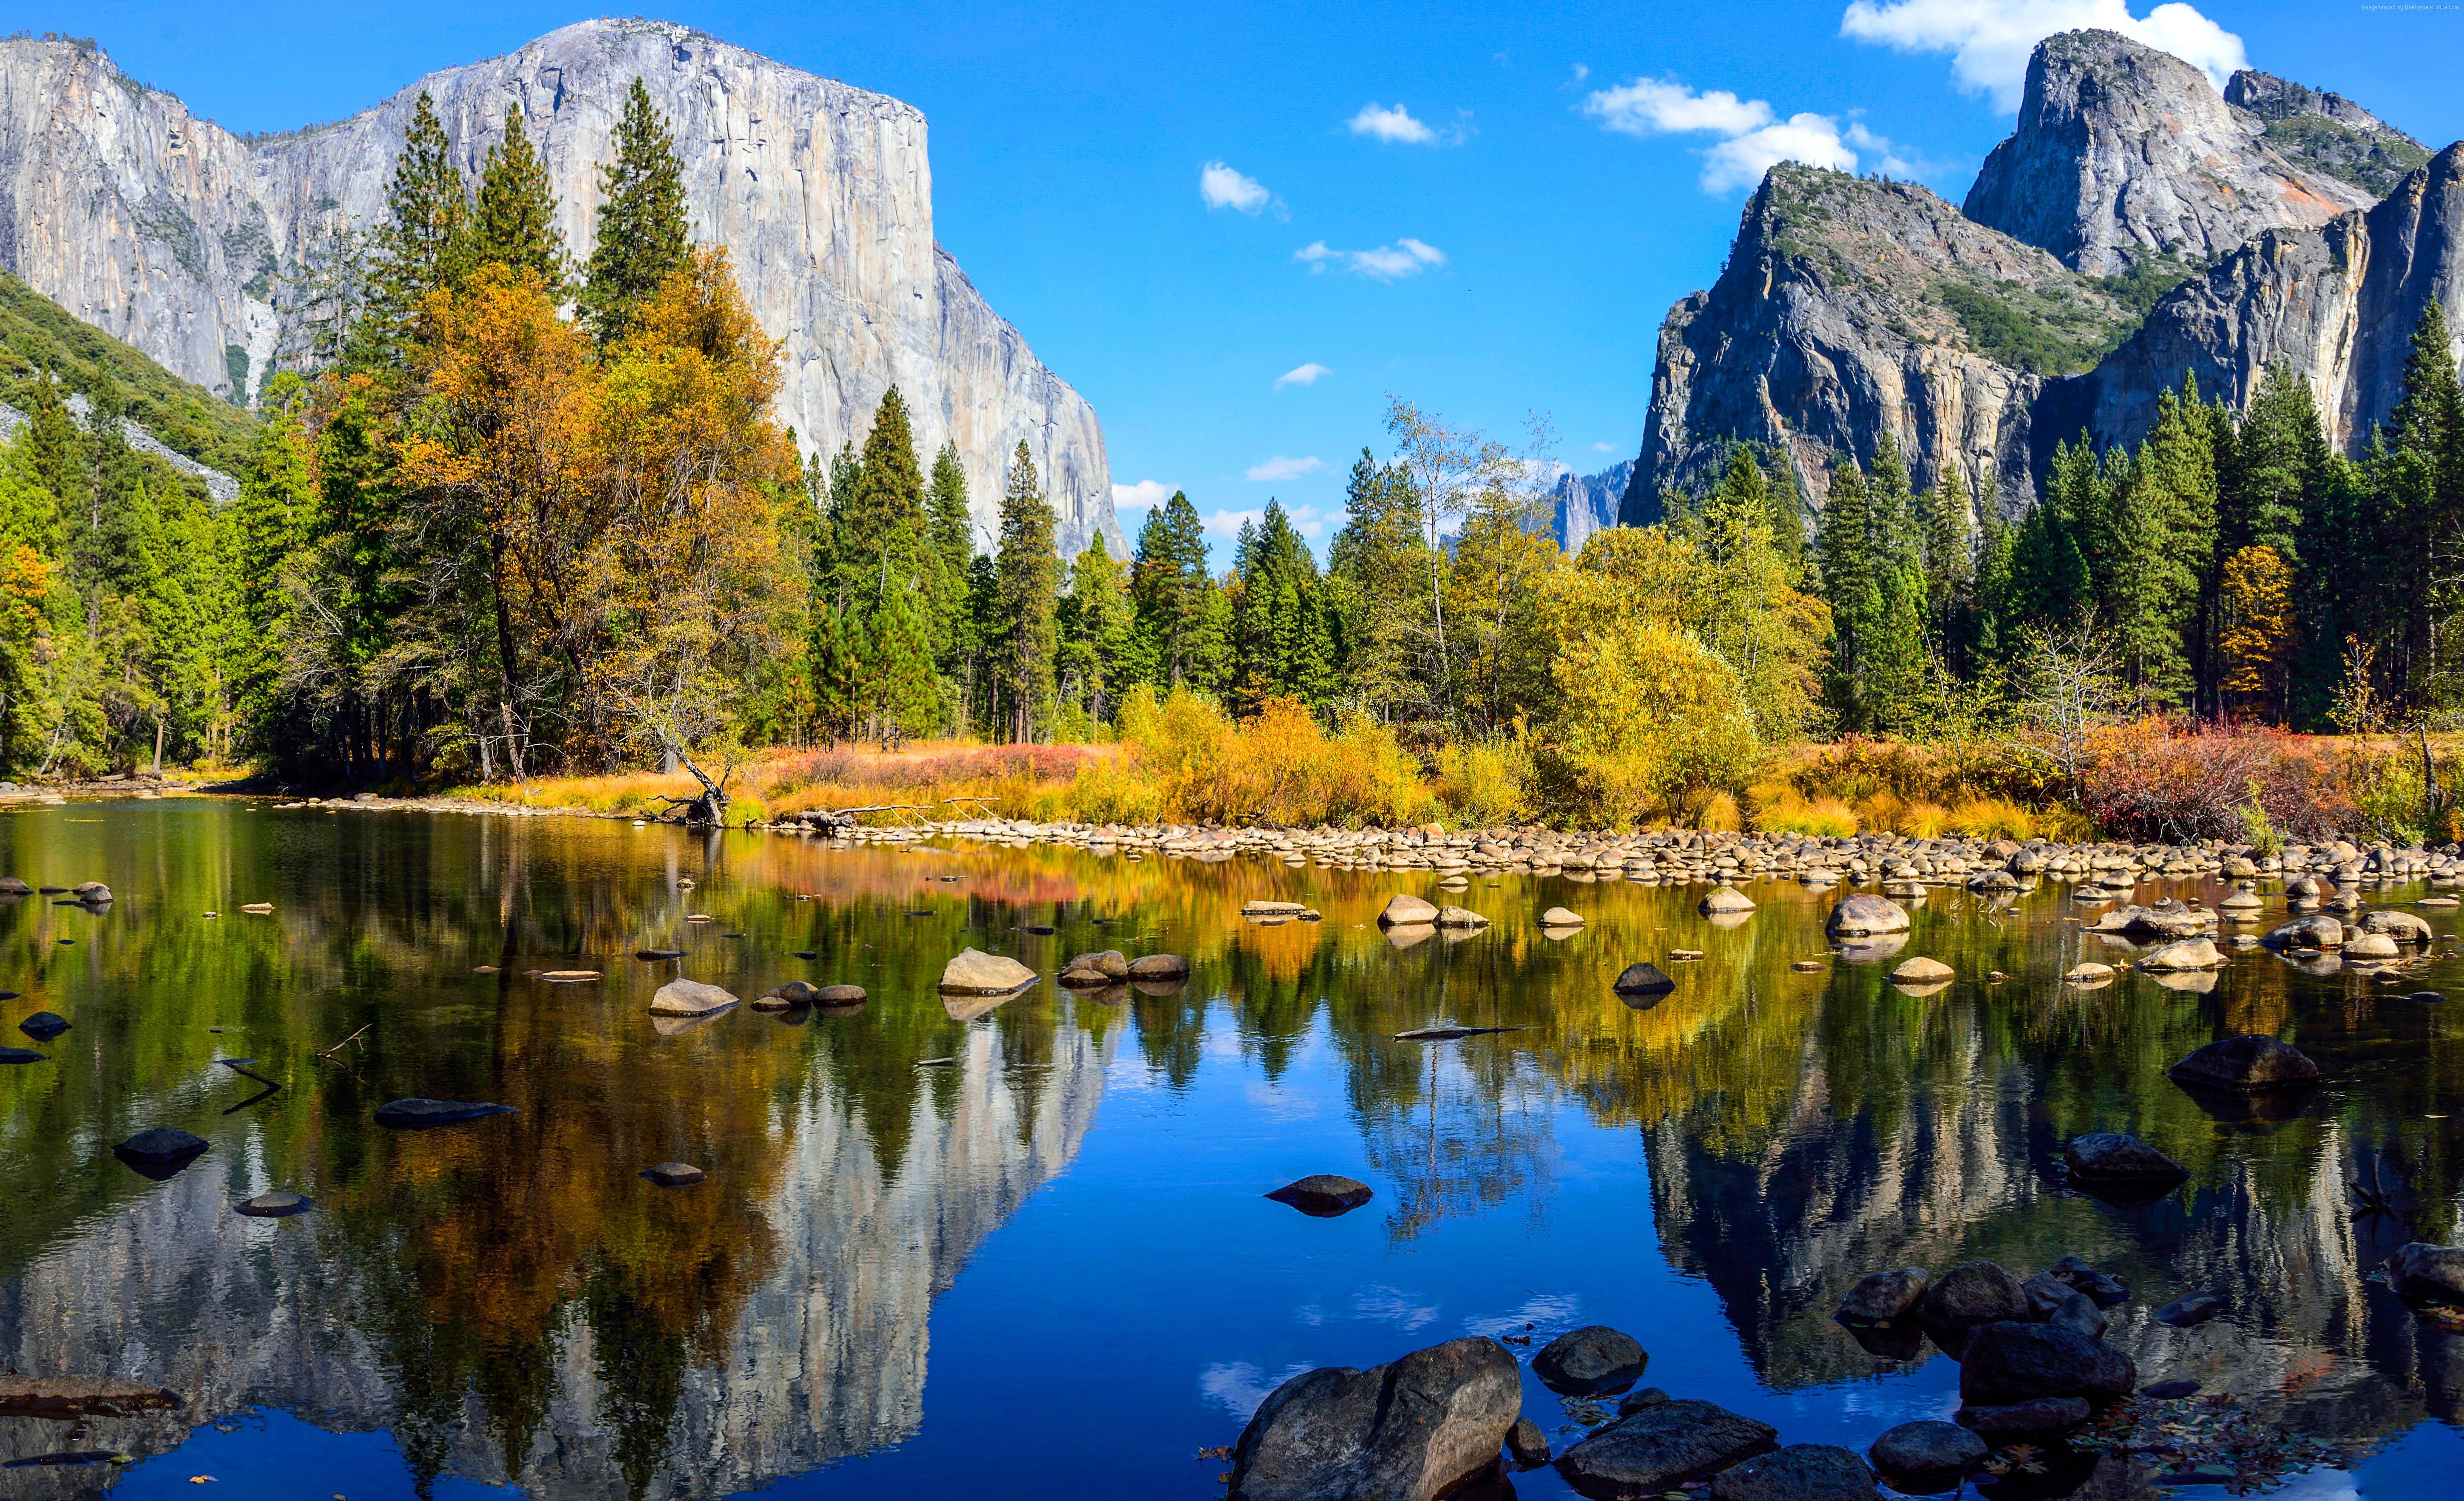  5k wallpapers El Capitan forest OSX apple mountains lake Page